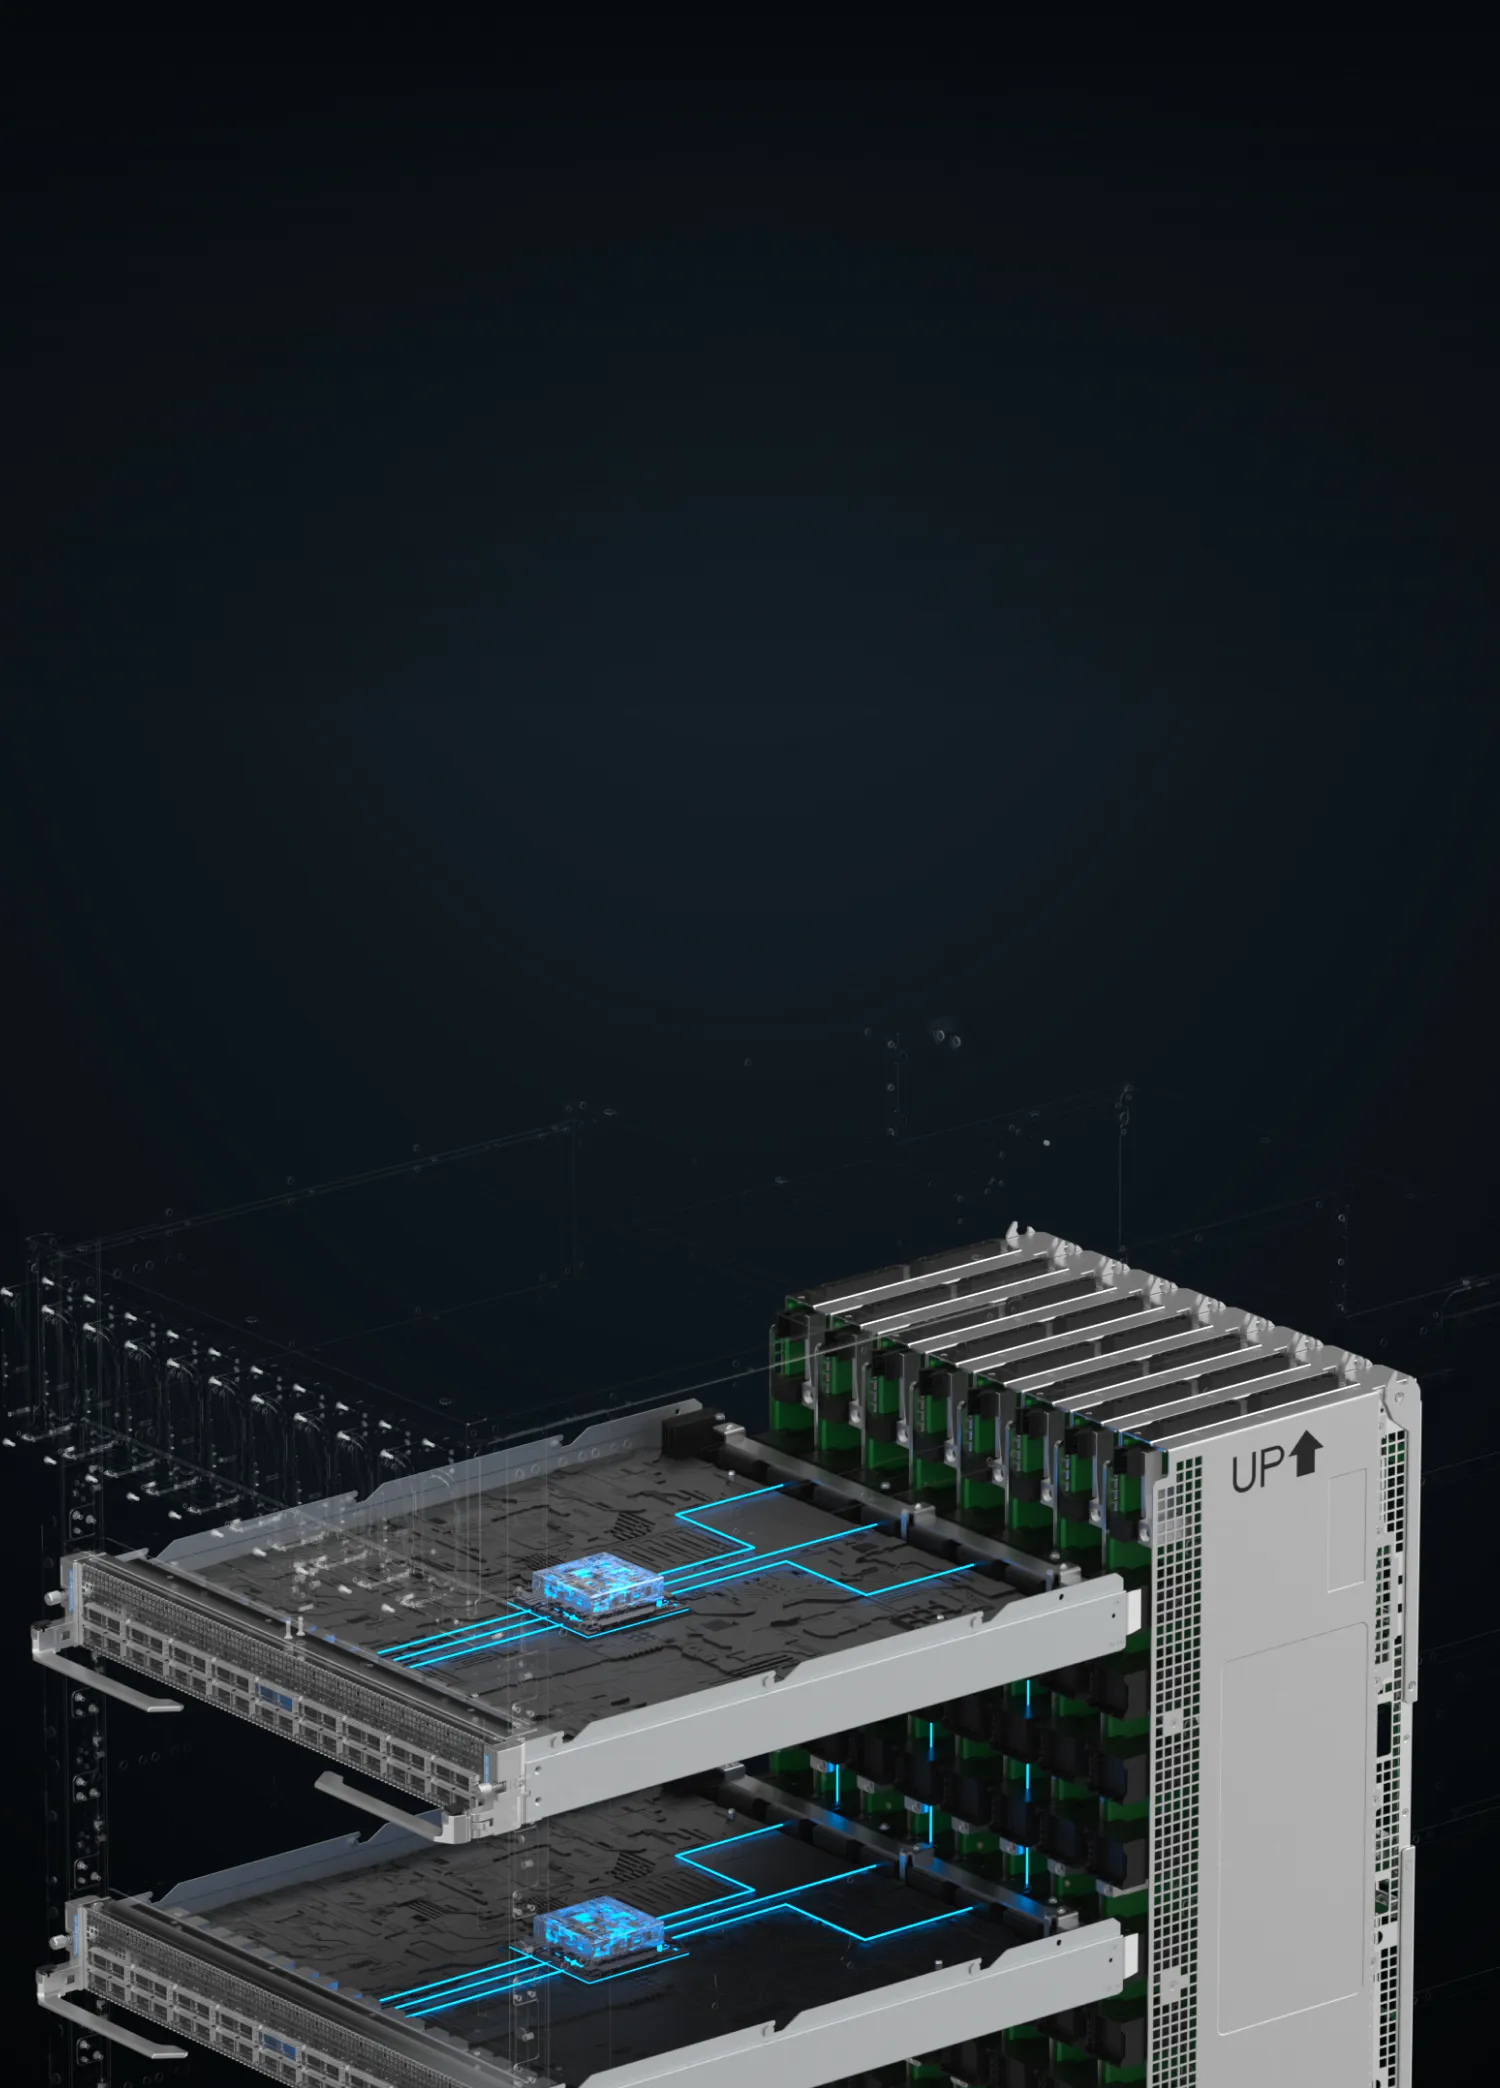 RG-N18010-XH – Next Generation Data Center Network High-Density Centralized  Modular Core Switch with 100GE/400GE Line Cards and Eight Service Slots -  Ruijie Networks